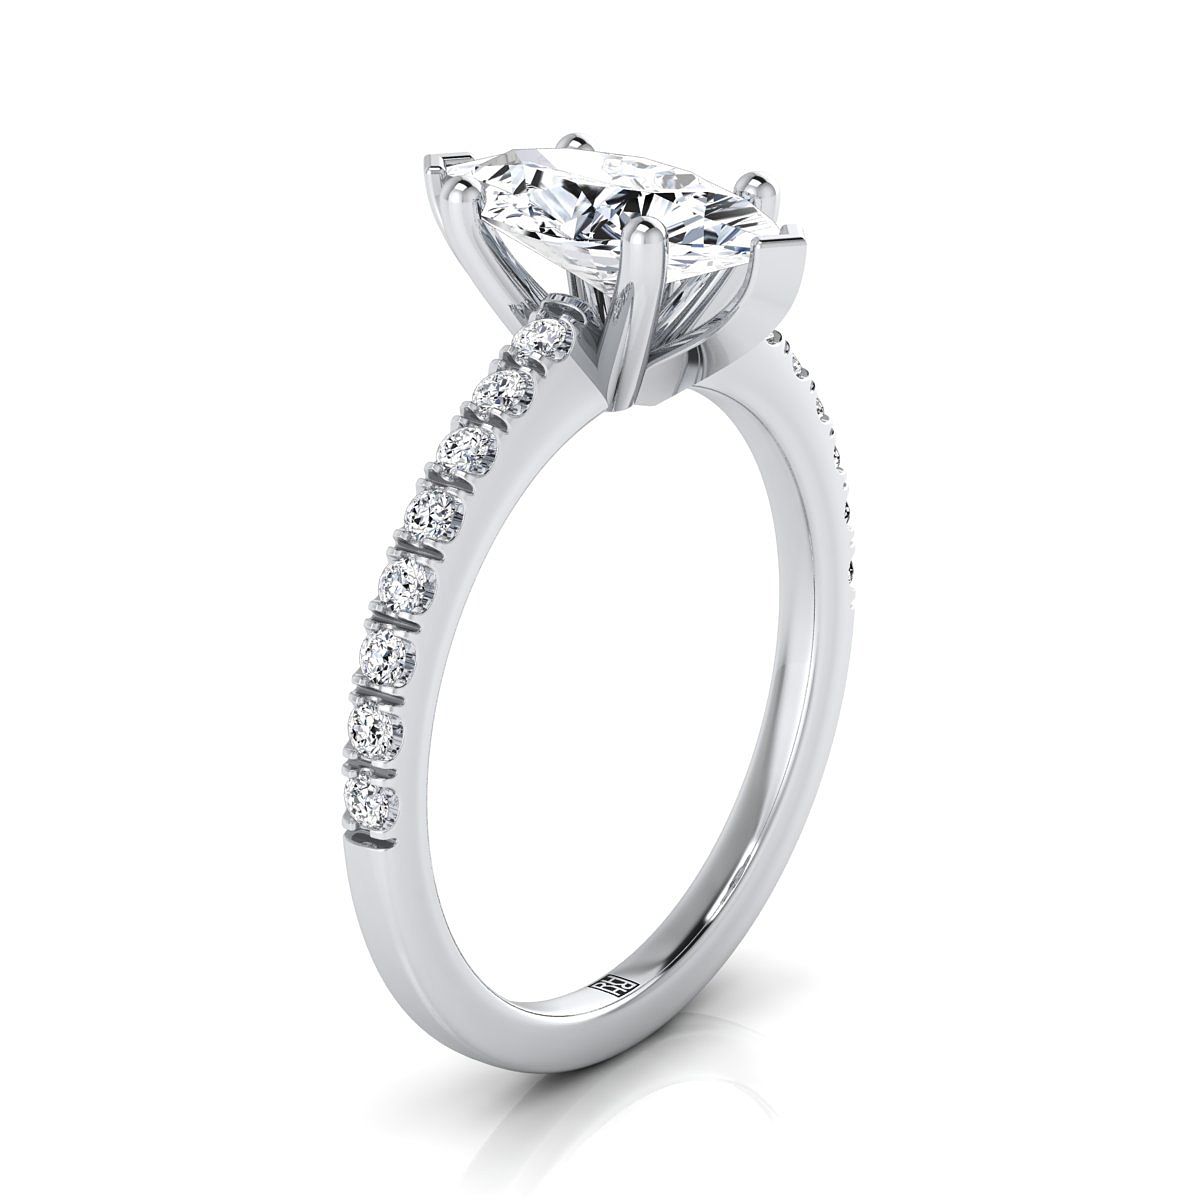 18K White Gold Marquise  Simple Linear Diamond Pave Engagement Ring -1/5ctw